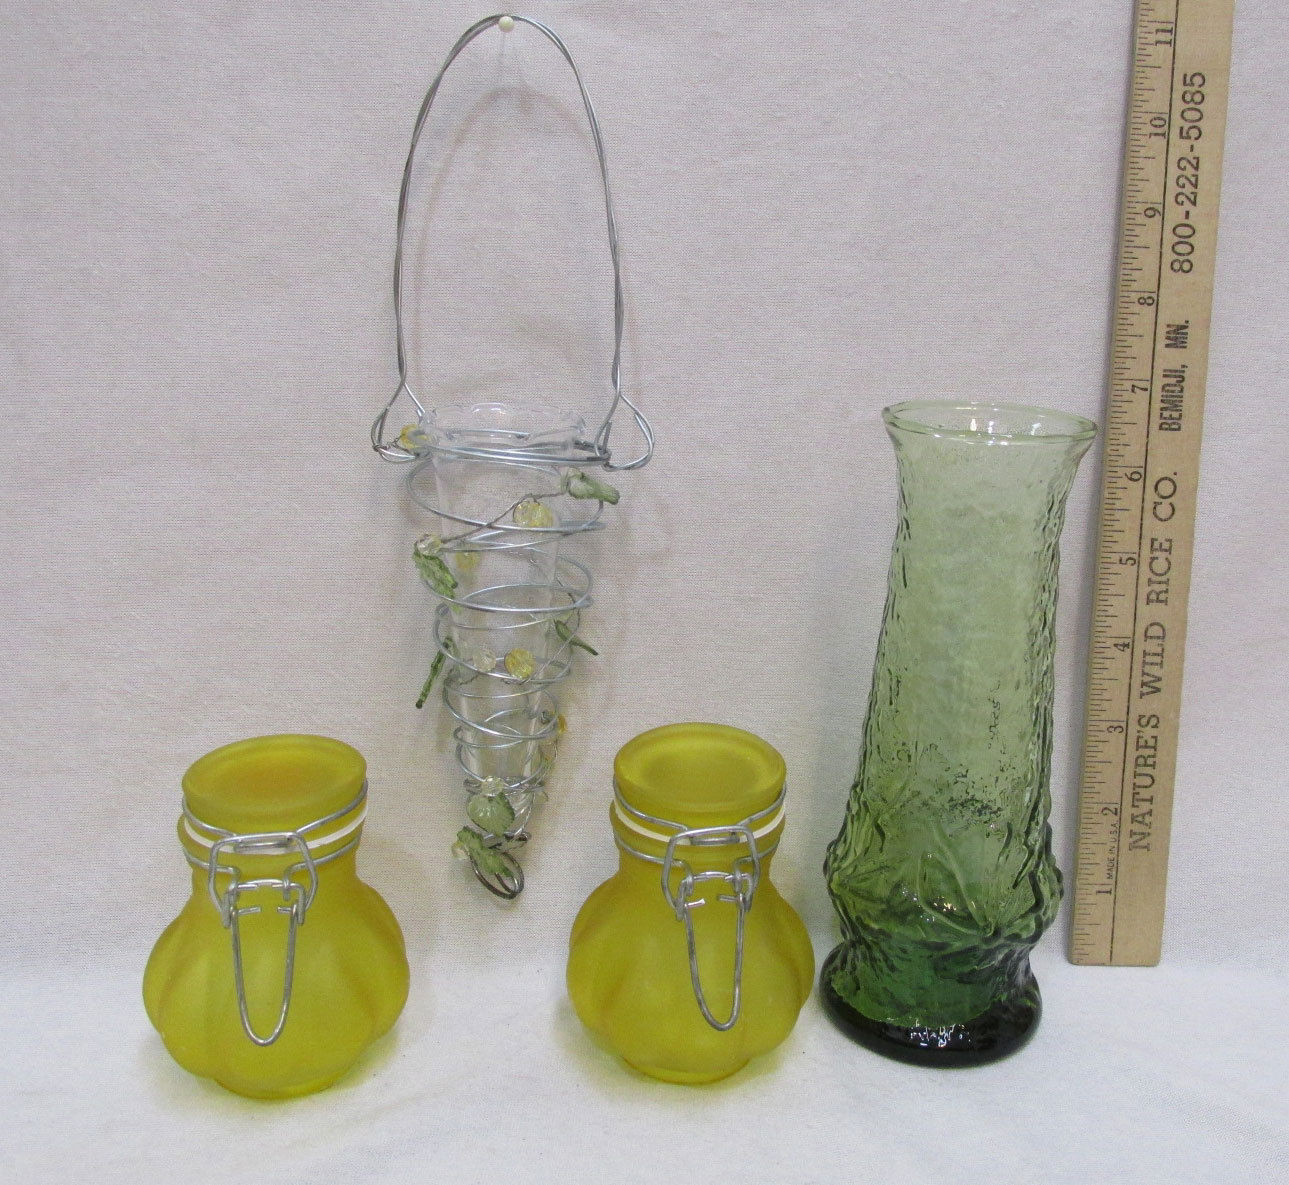 28 Lovely 4 Inch Bud Vase 2024 free download 4 inch bud vase of hanging bud vase glass jars green yellow and 50 similar items with regard to hanging bud vase glass jars green yellow shade leaf bead charms floral lot of 4